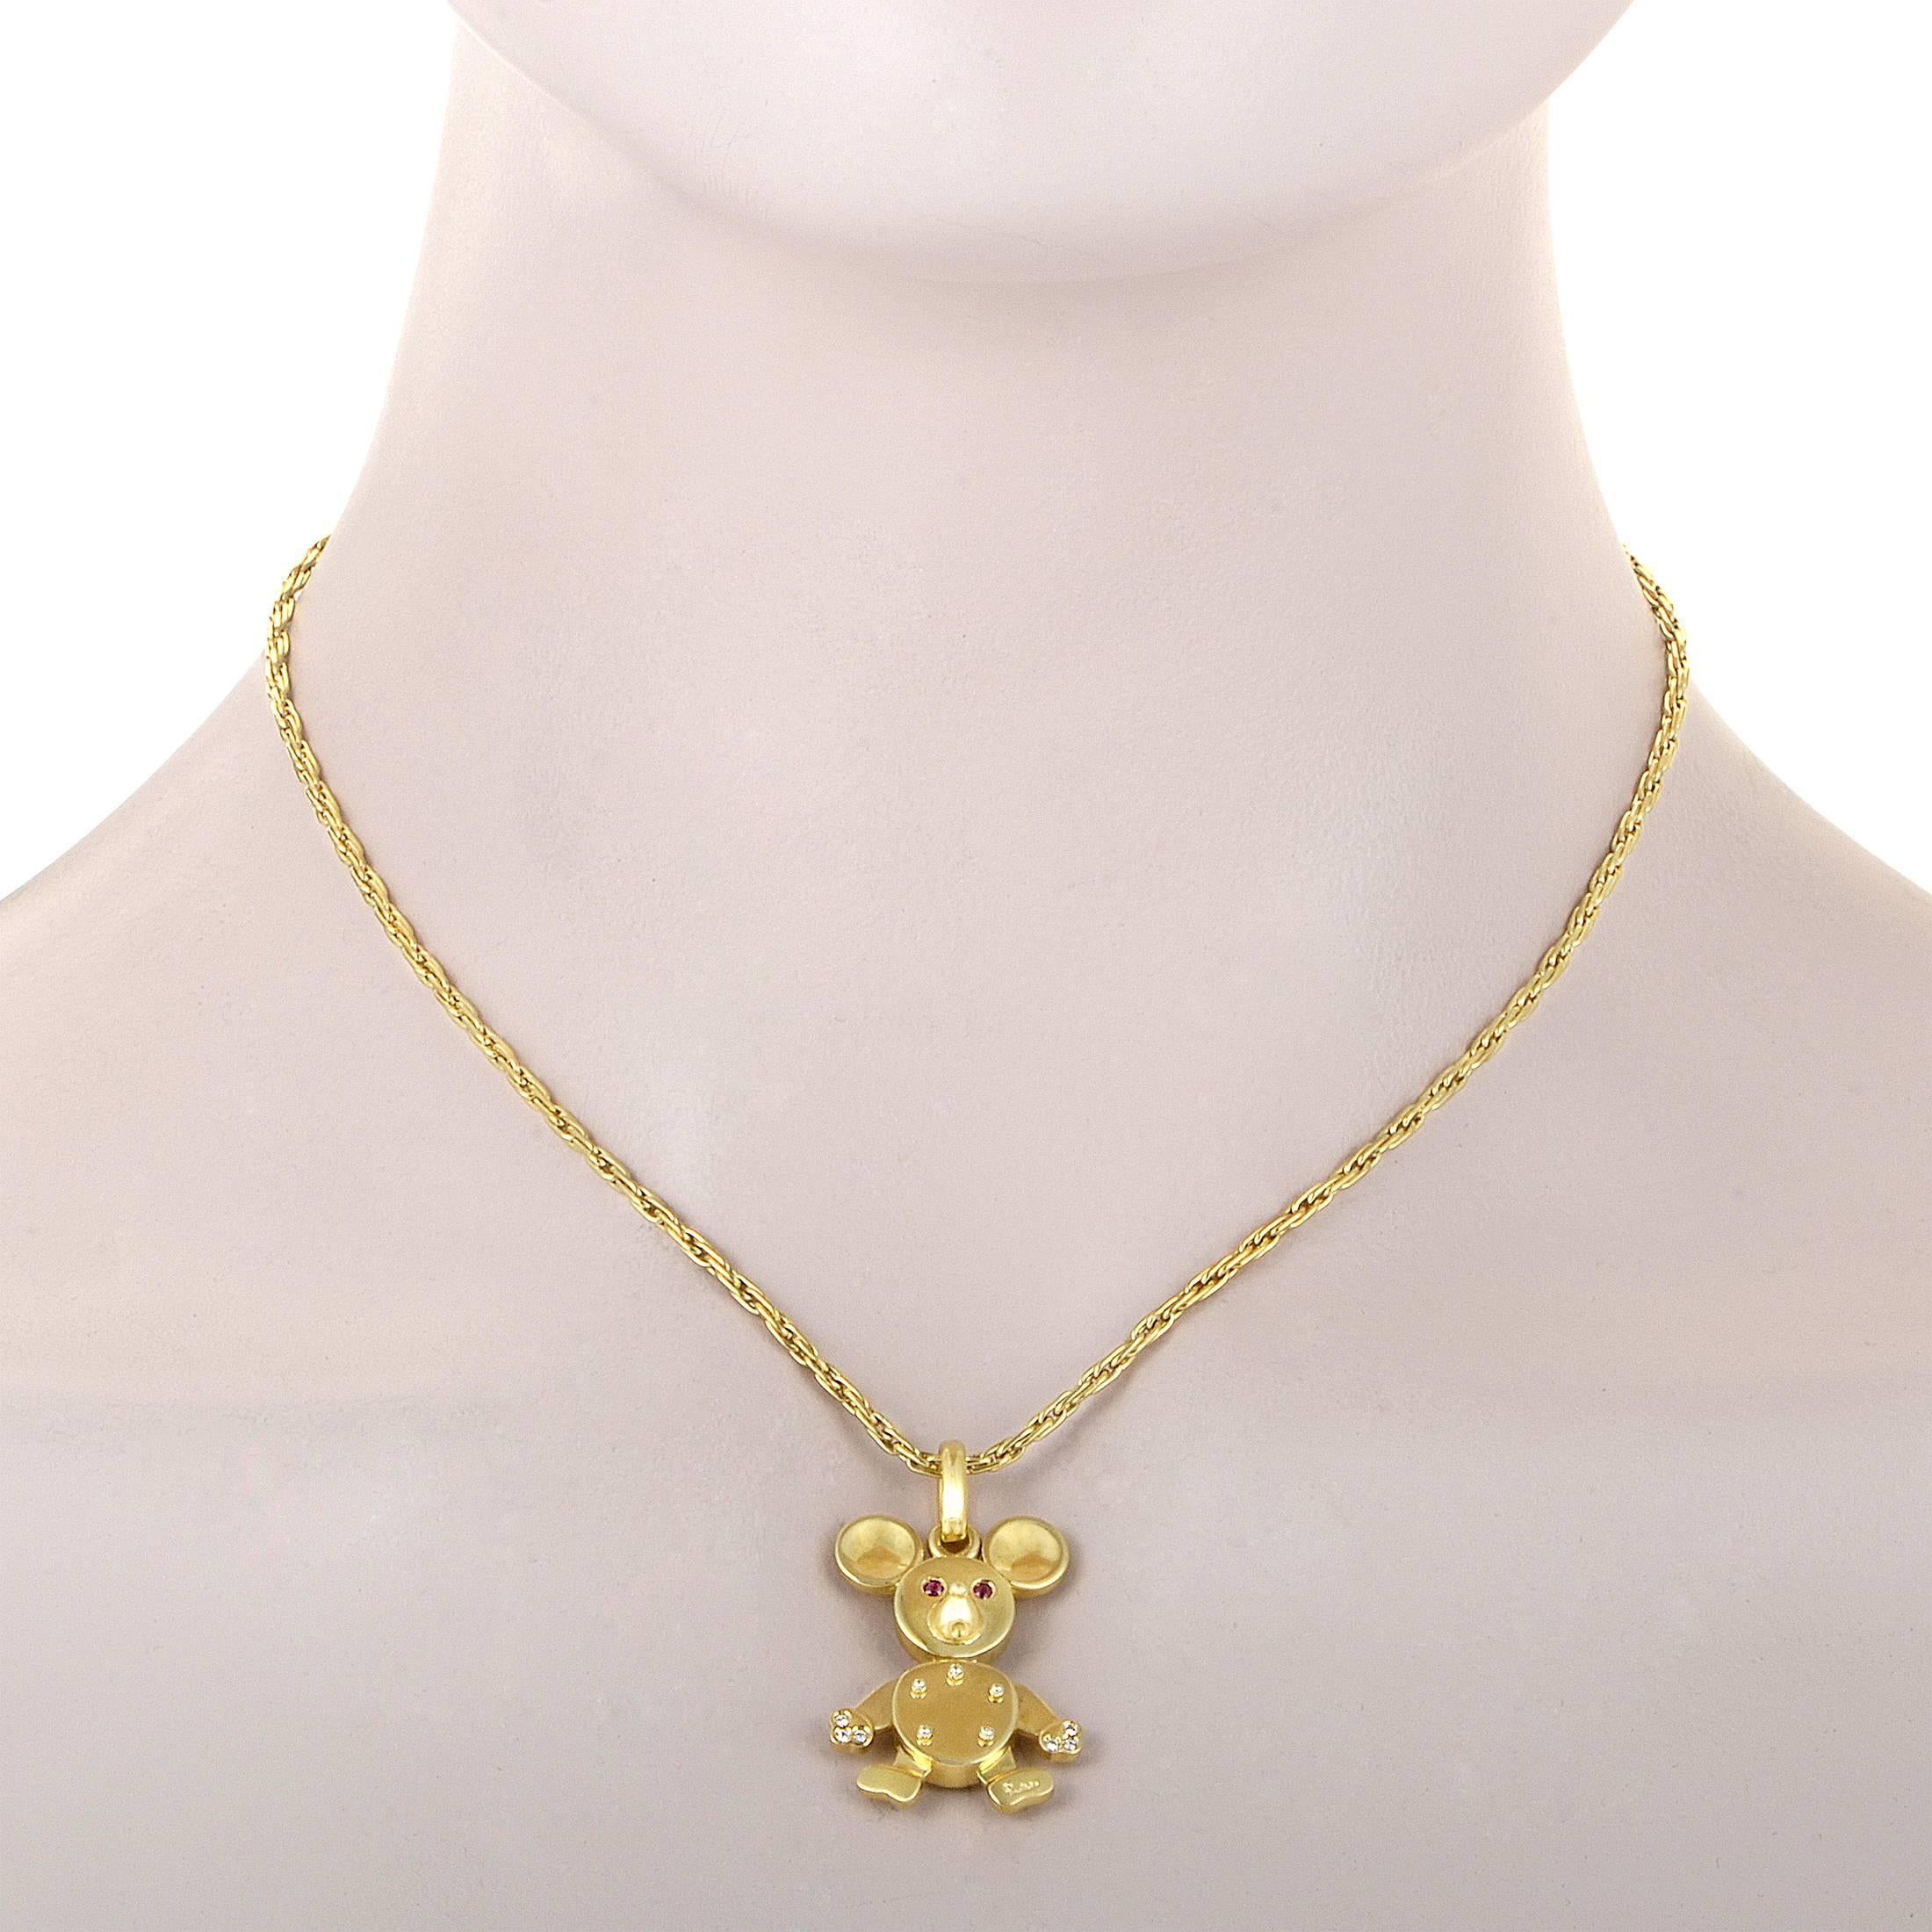 Designed in the brand's distinctive style and exuding the familiar adorable allure, the nifty pendant of this delightful necklace from Pomellato is made of luxuriously gleaming 18K yellow gold and adorned with sparkling diamonds as well as striking